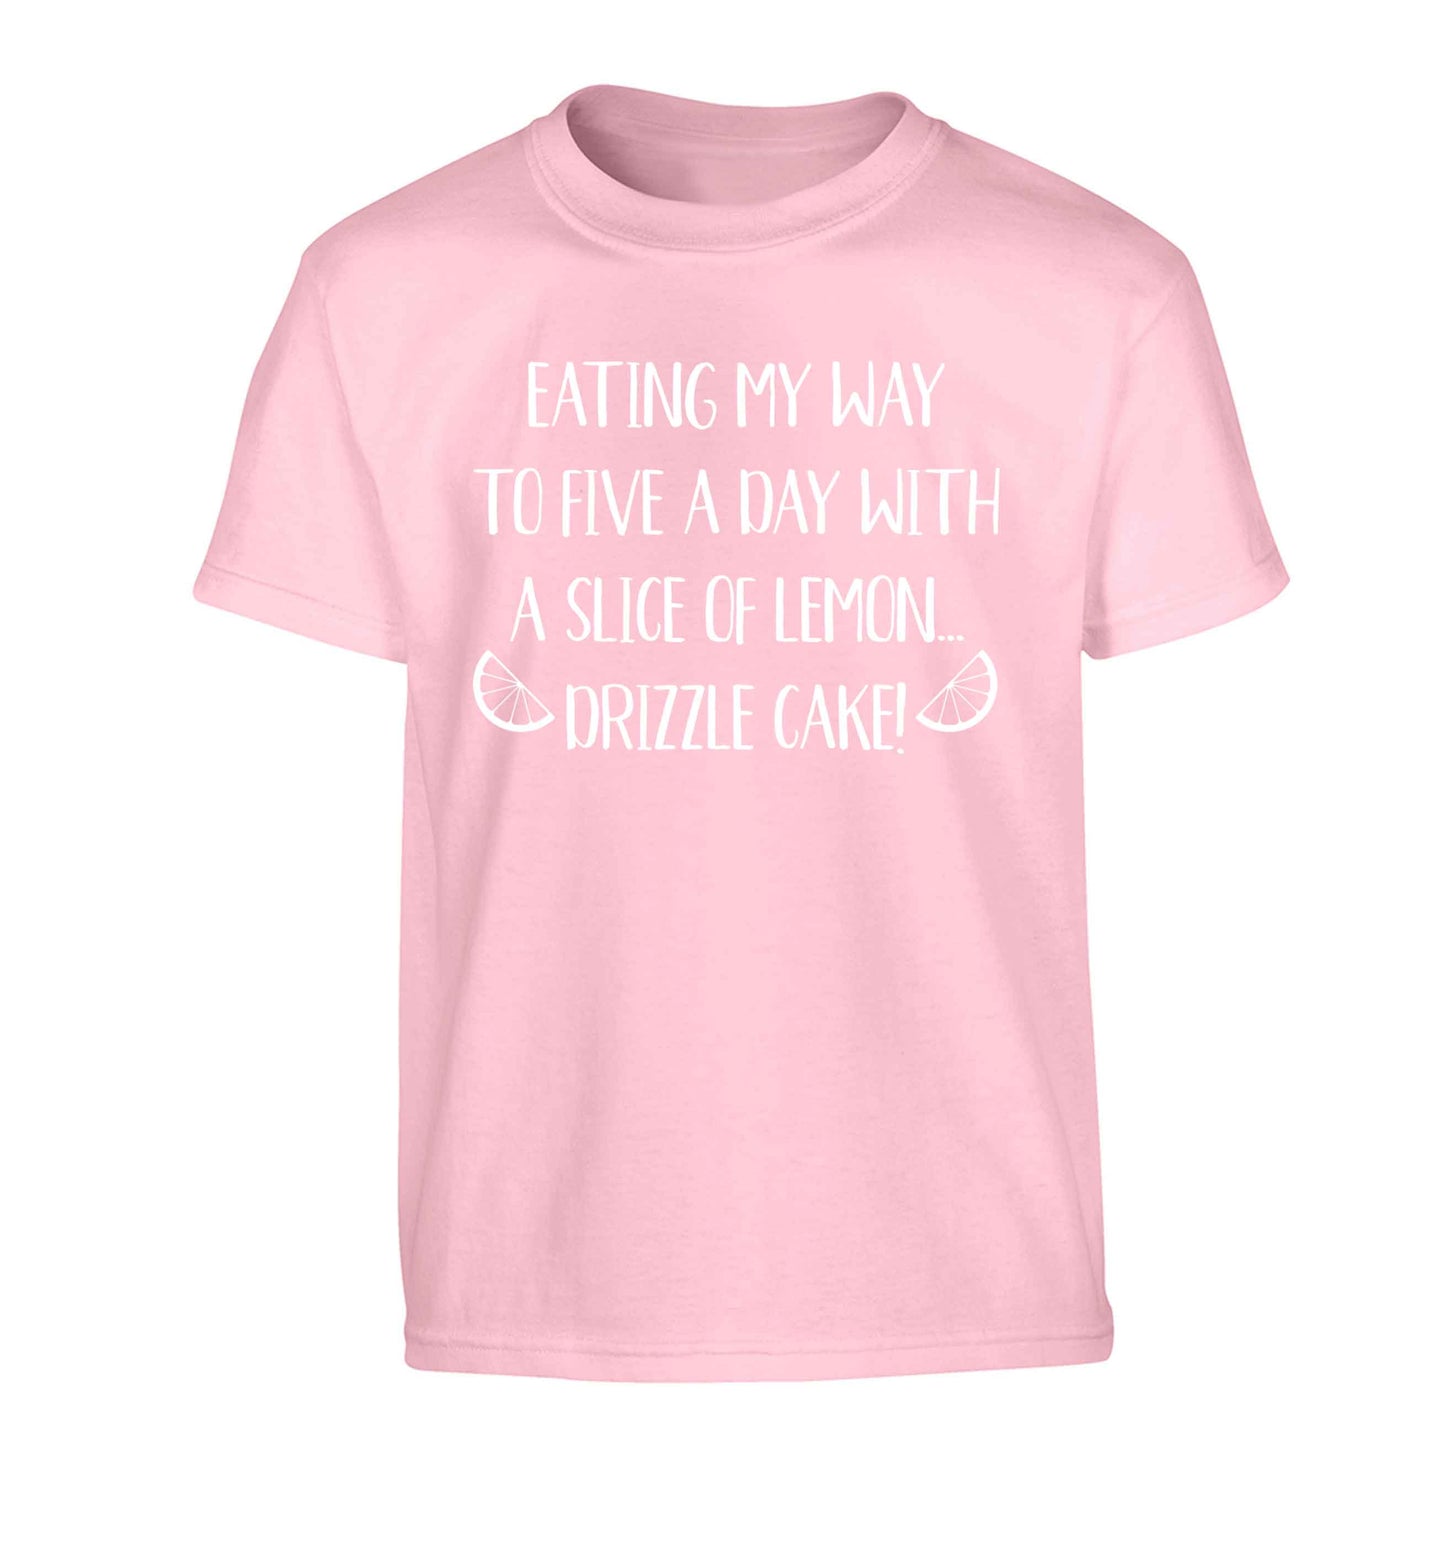 Eating my way to five a day with a slice of lemon drizzle cake day Children's light pink Tshirt 12-13 Years